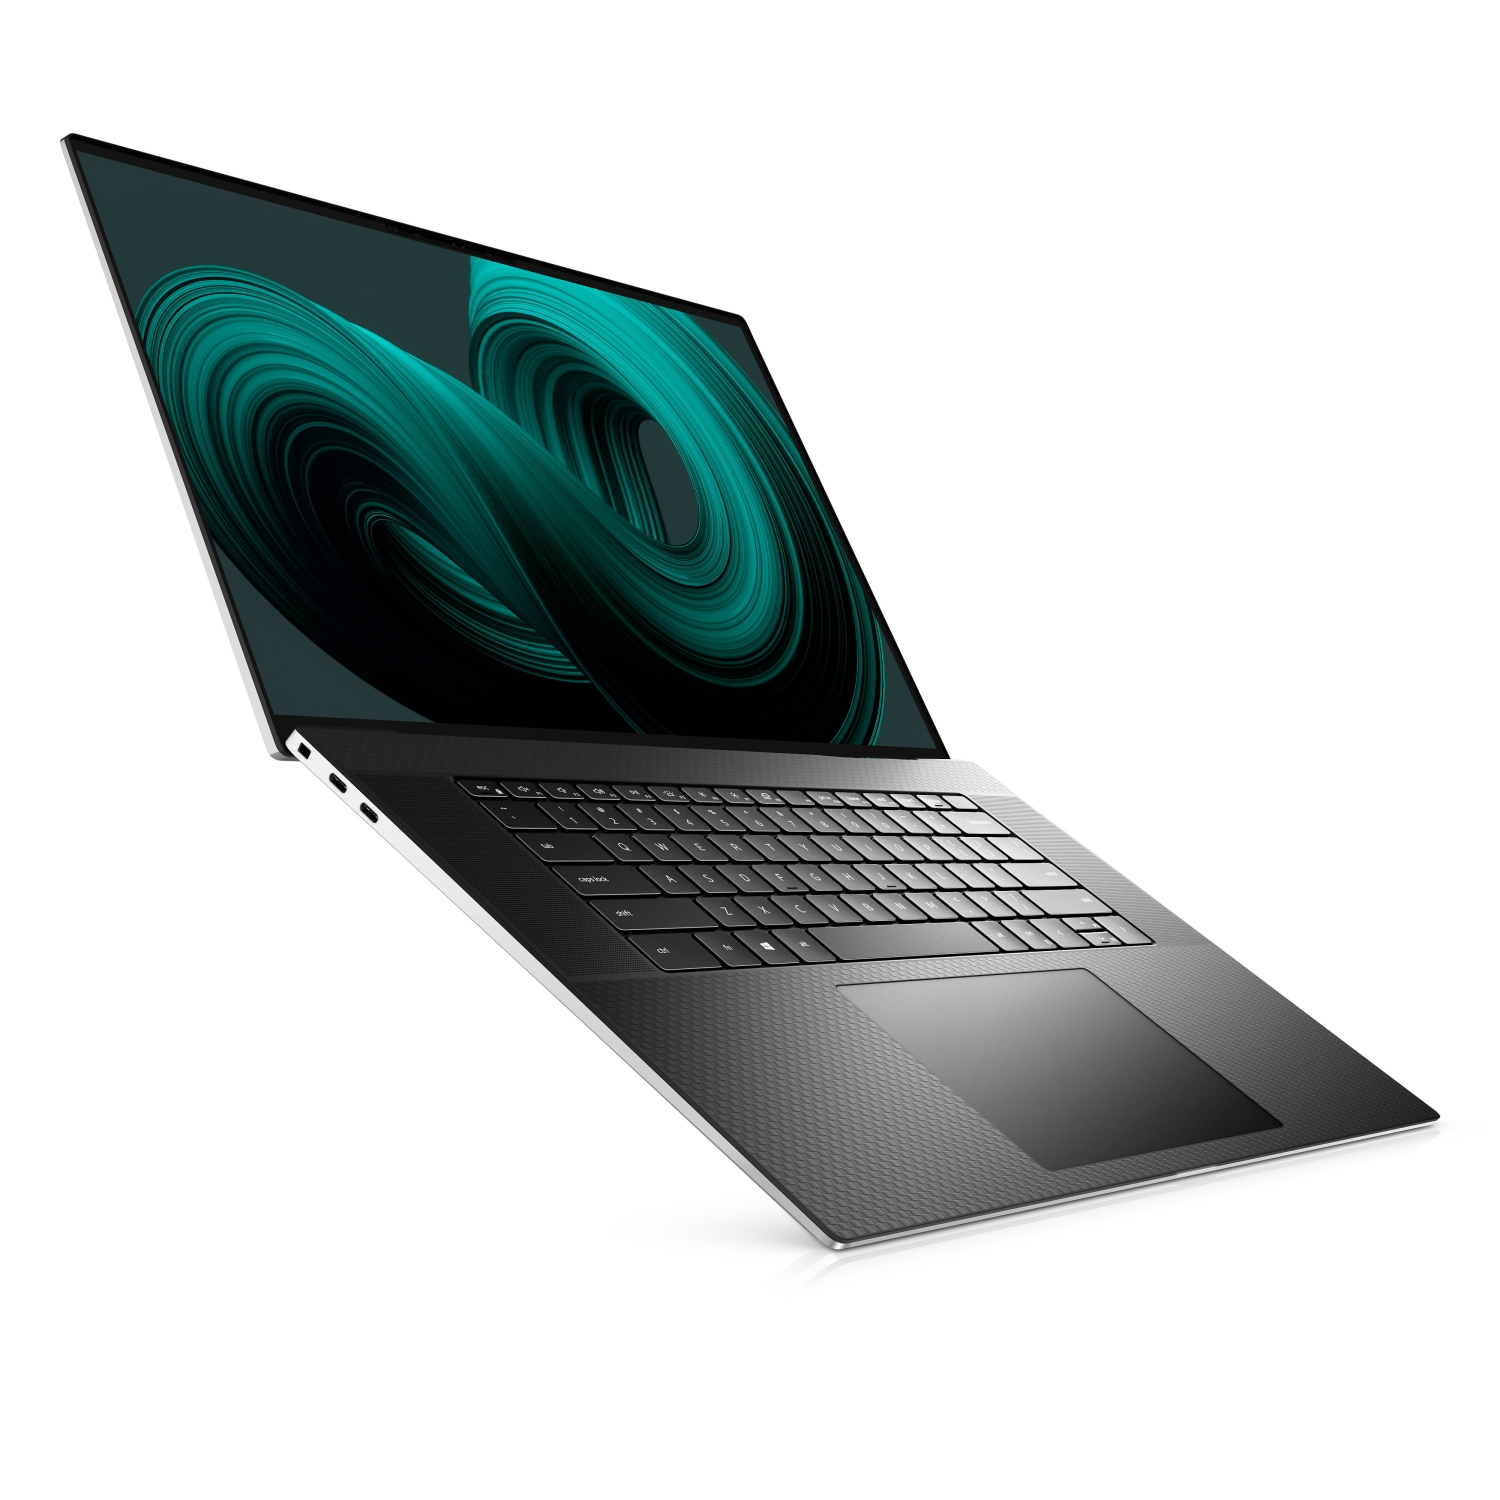 Refurbished (Excellent) - Dell XPS 17 9710 Laptop (2021) | 17" FHD+ | Core i5 - 512GB SSD - 16GB RAM | 6 Cores @ 4.5 GHz - 11th Gen CPU Certified Refurbished